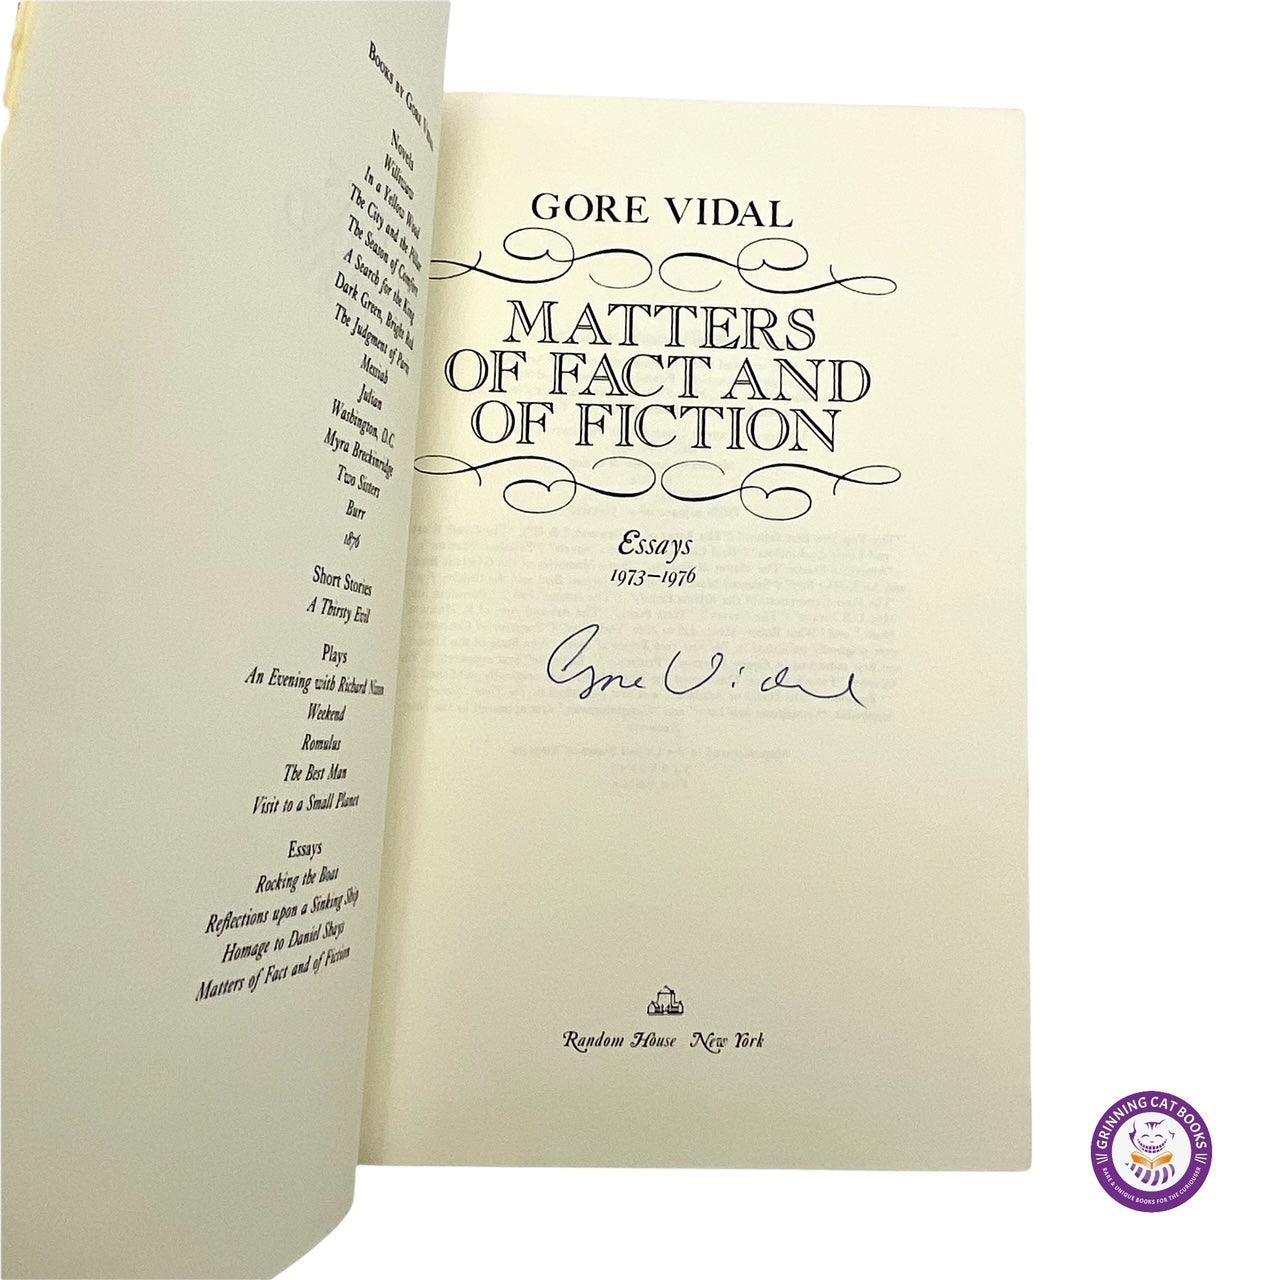 Matters of Fact and Fiction: Essays 1973-1976 (signed by Gore Vidal) - Grinning Cat Books - LITERATURE - SIGNED